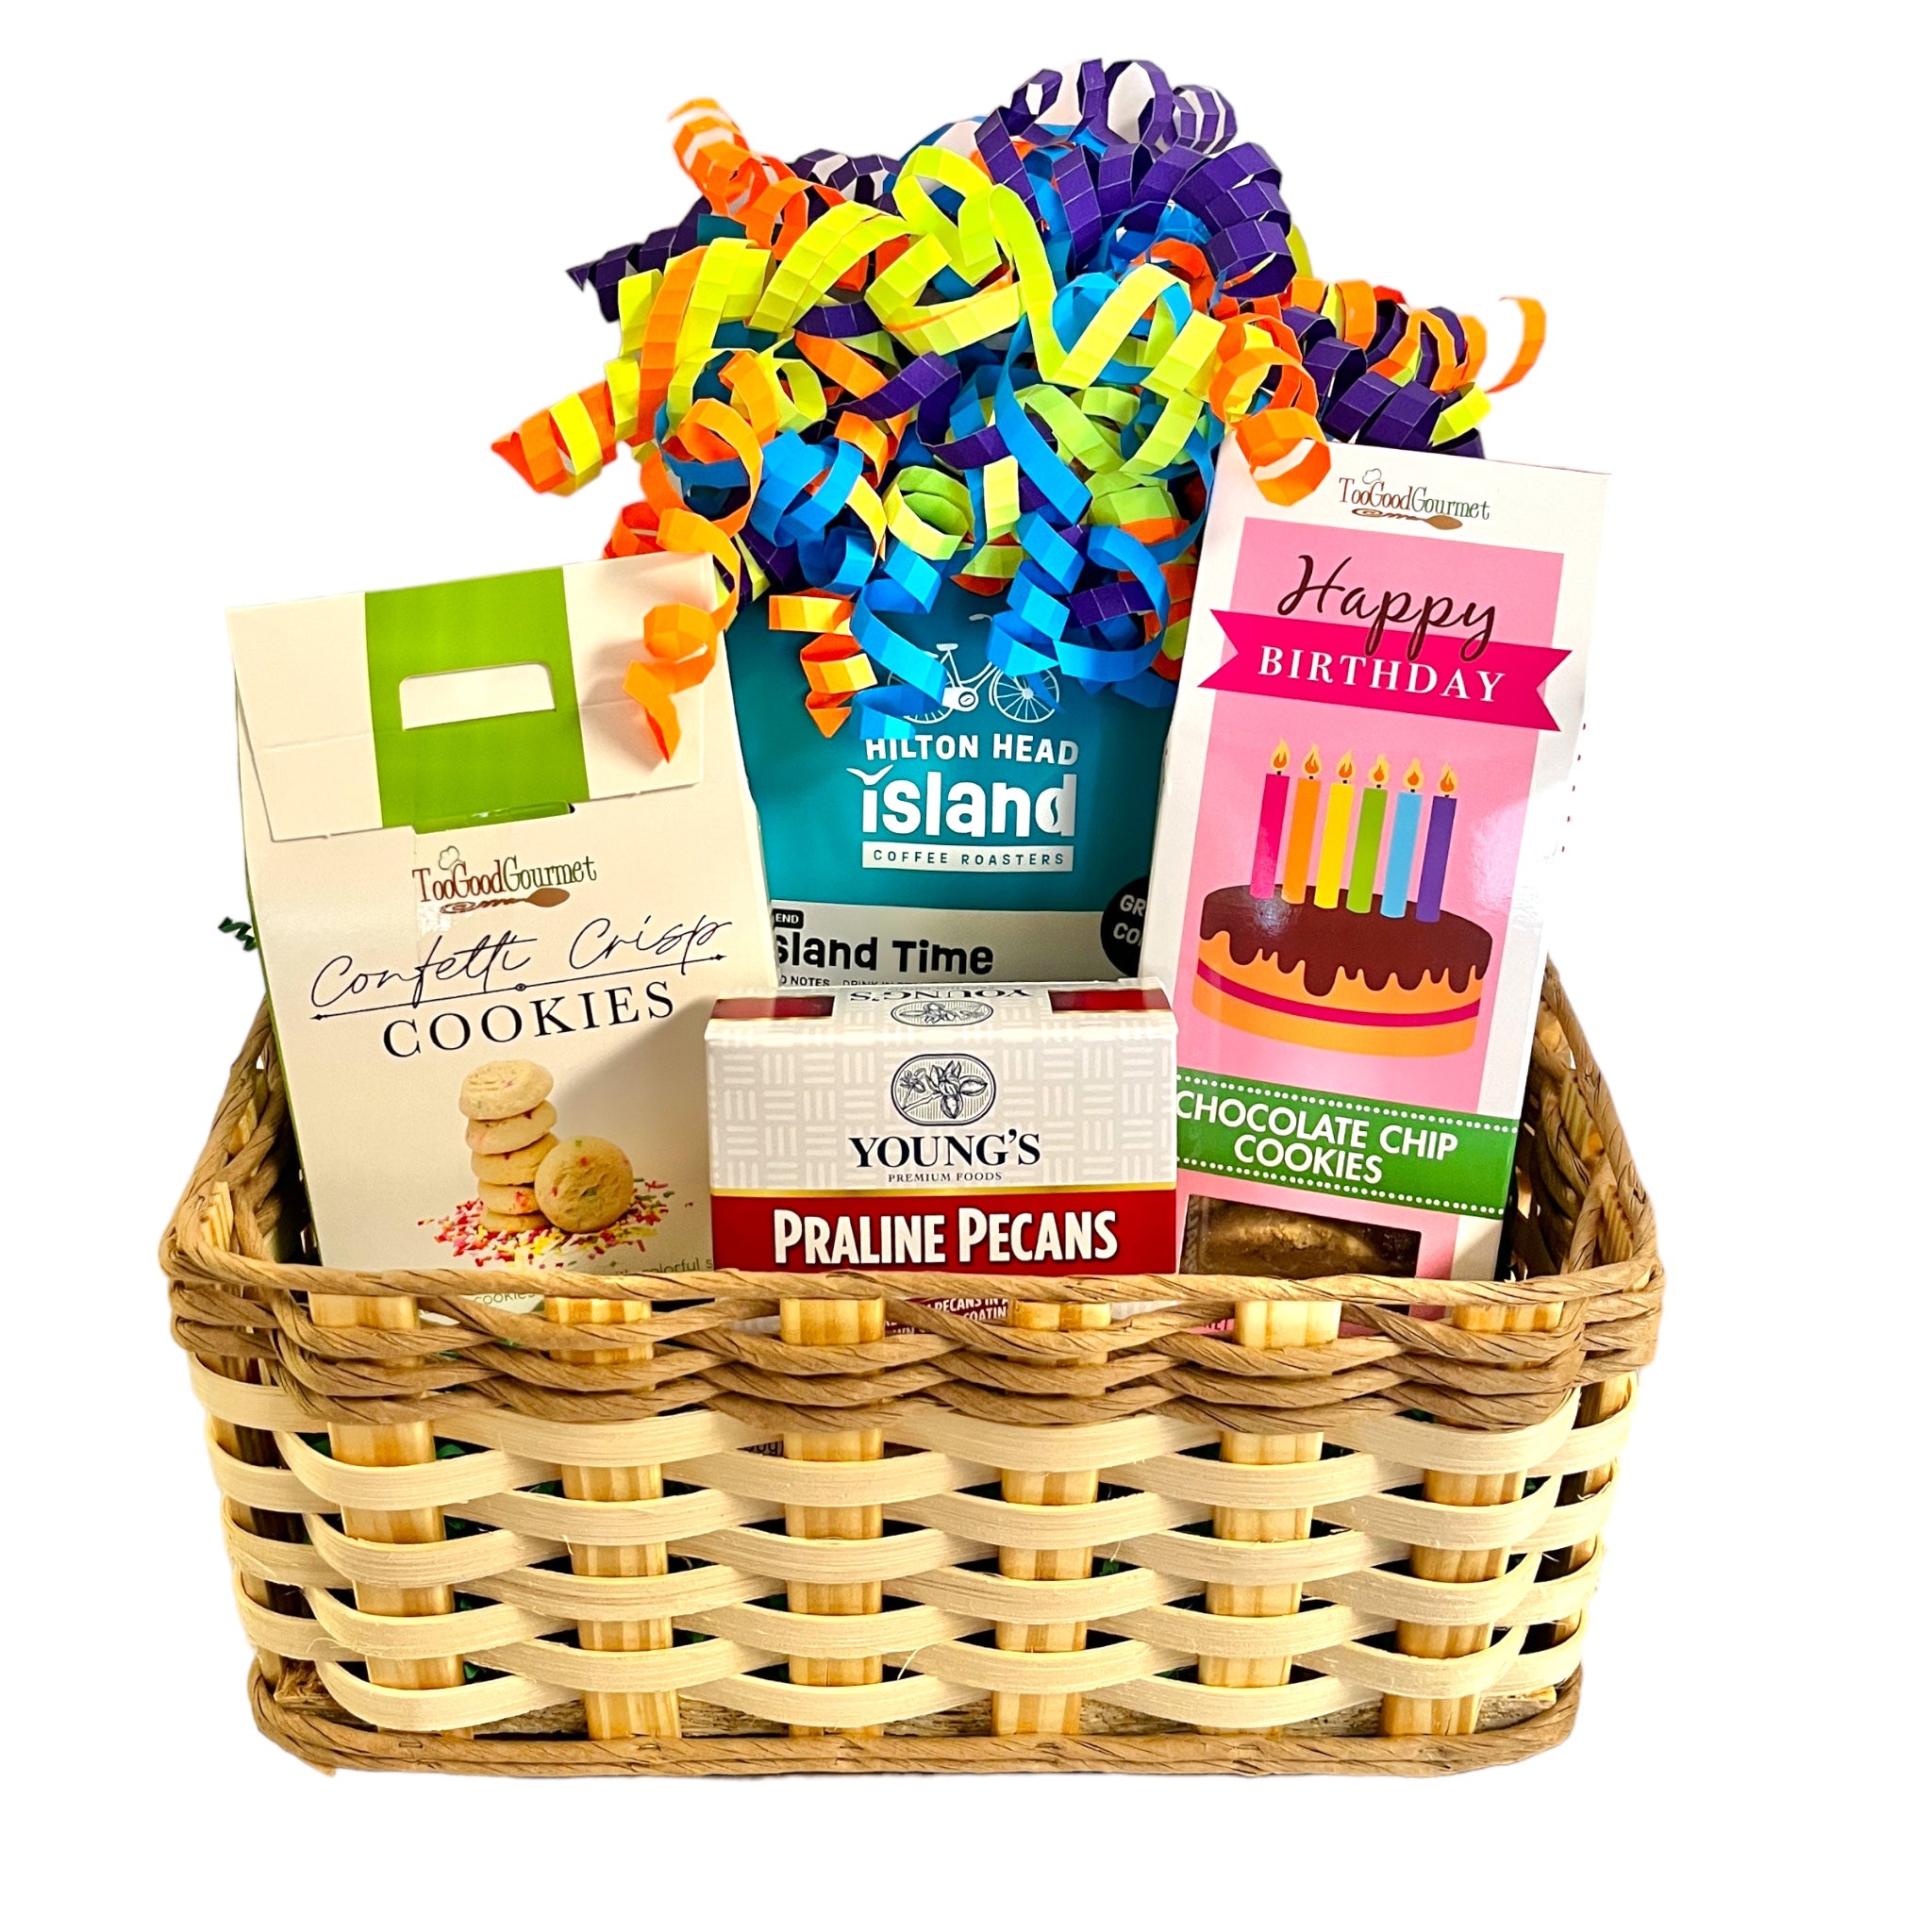 Kitchener Gift Baskets - Kitchener Gift Basket Delivery | Send Corporate  Fruit and Gourmet Gift Baskets to Kitchener